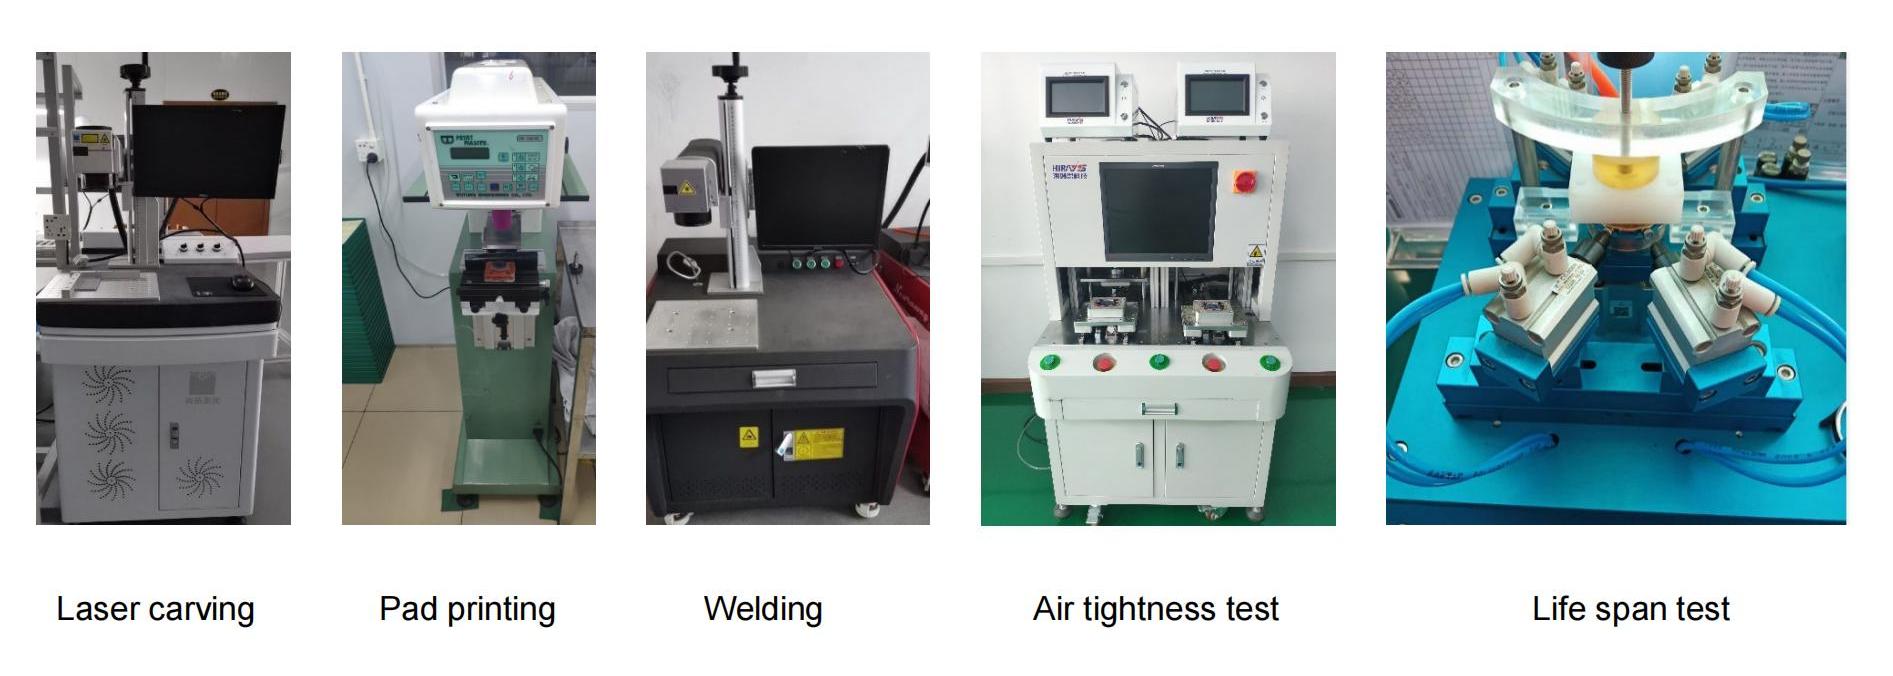 Production Equipment for Metal Injection Molding, Professional Machine, Precision Tools for High-Quality MIM Services